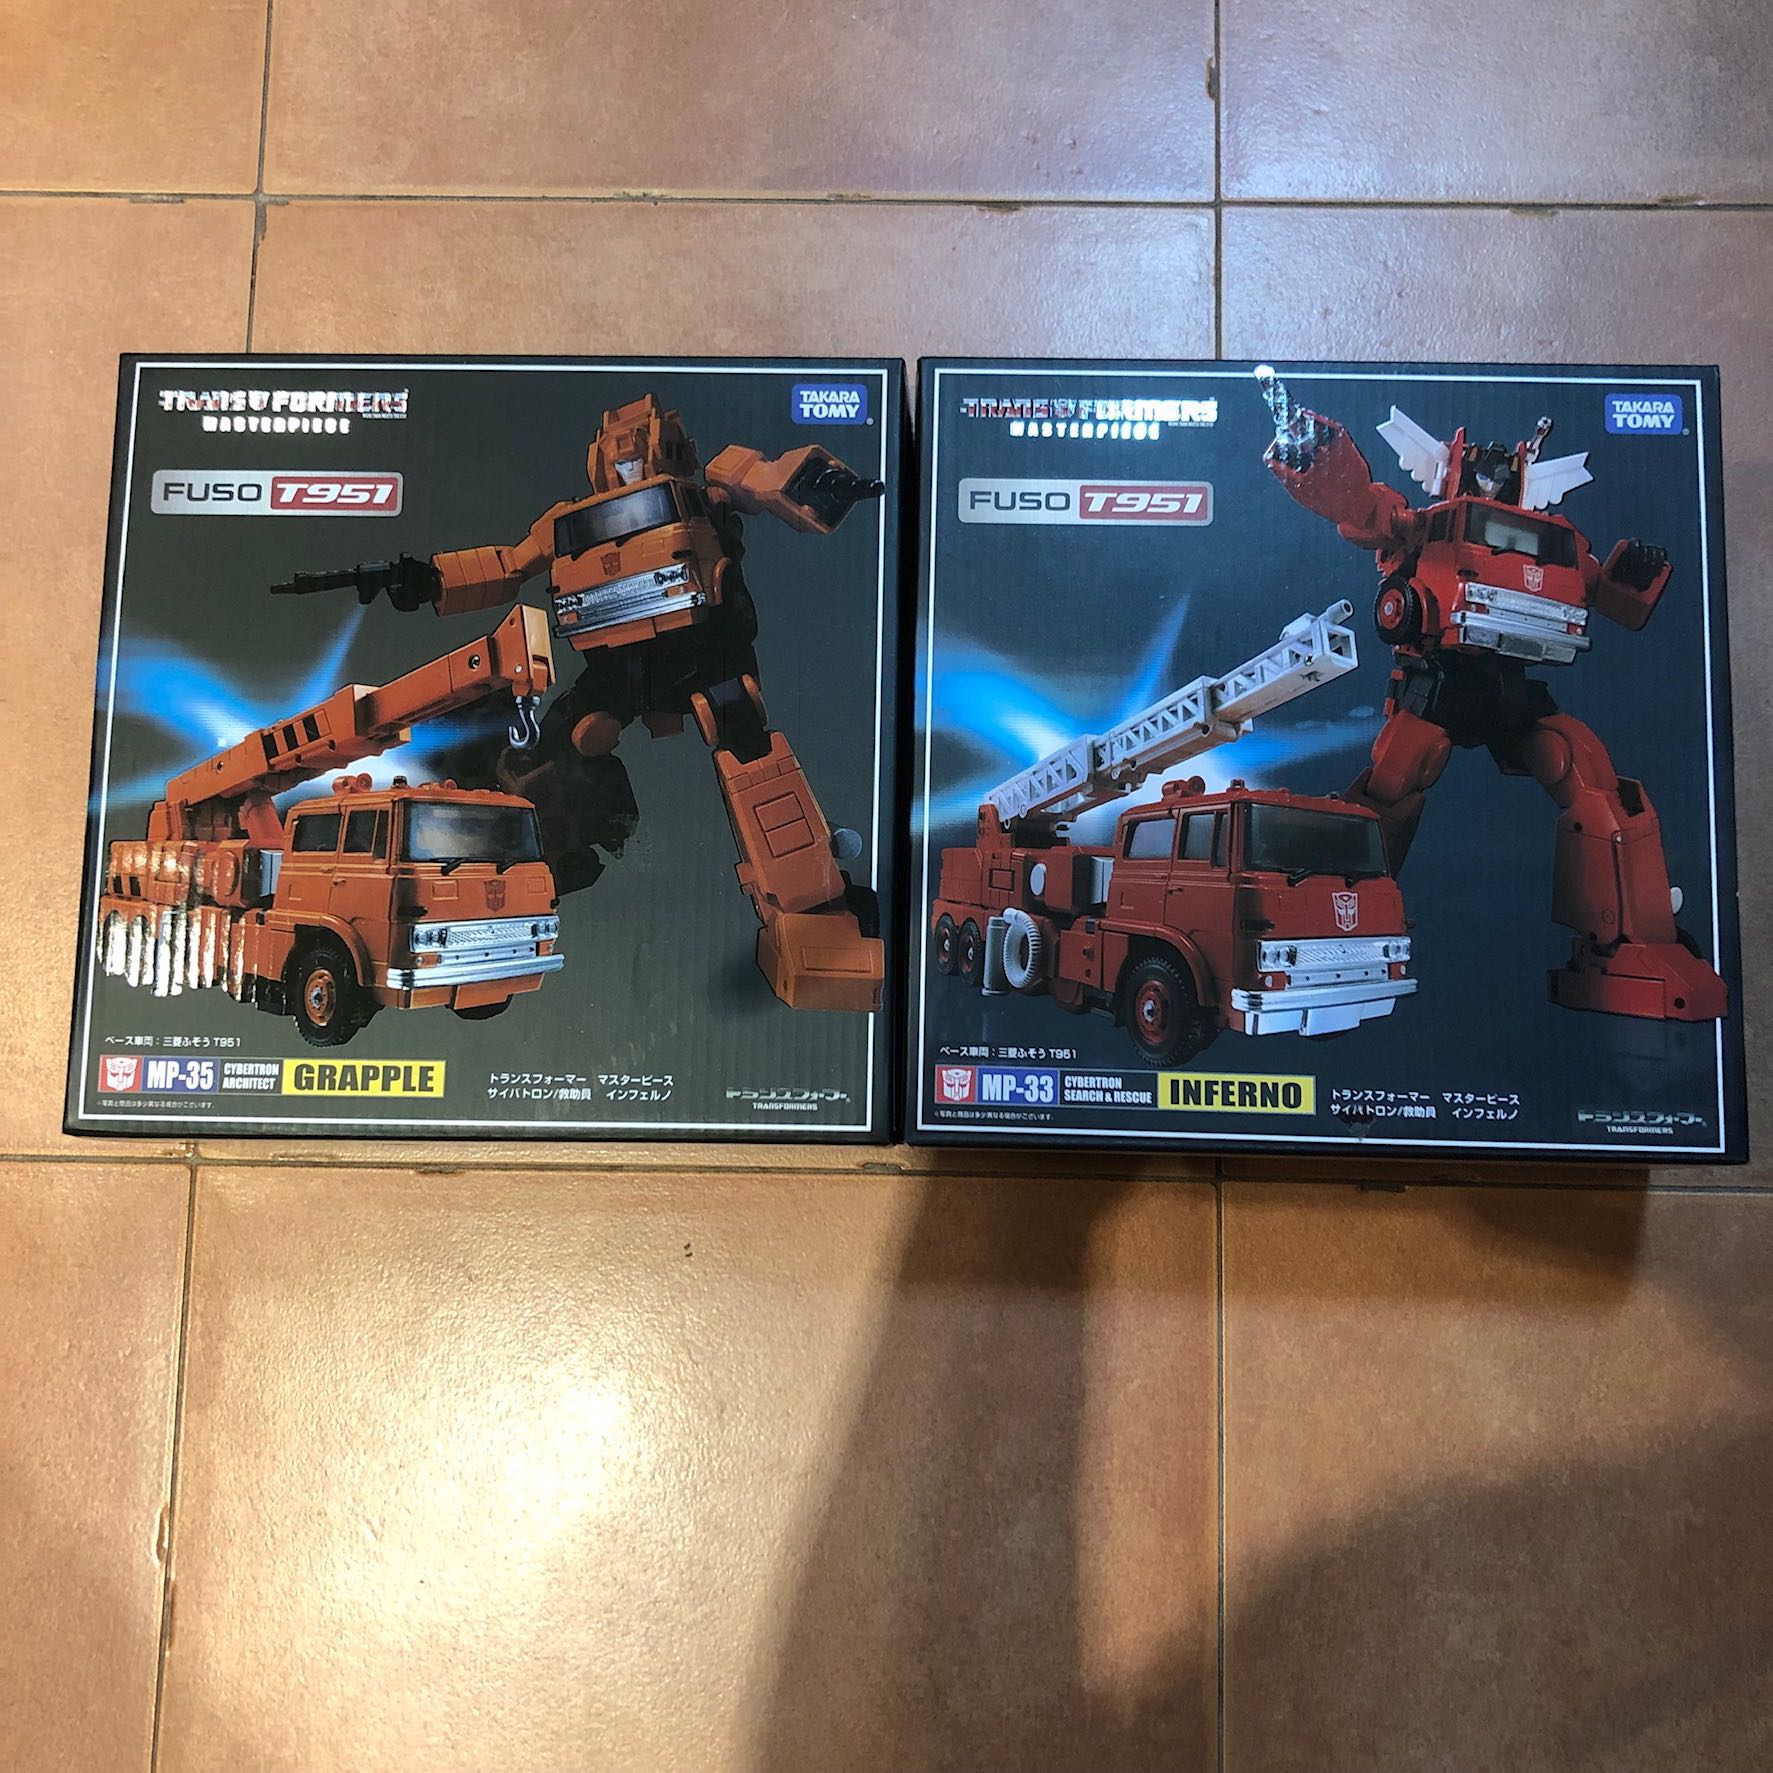 Transformers Masterpiece Ko Mp 33 Mp33 Inferno Misb Ko Mp 35 Mp35 Grapple Misb Hobbies Toys Toys Games On Carousell